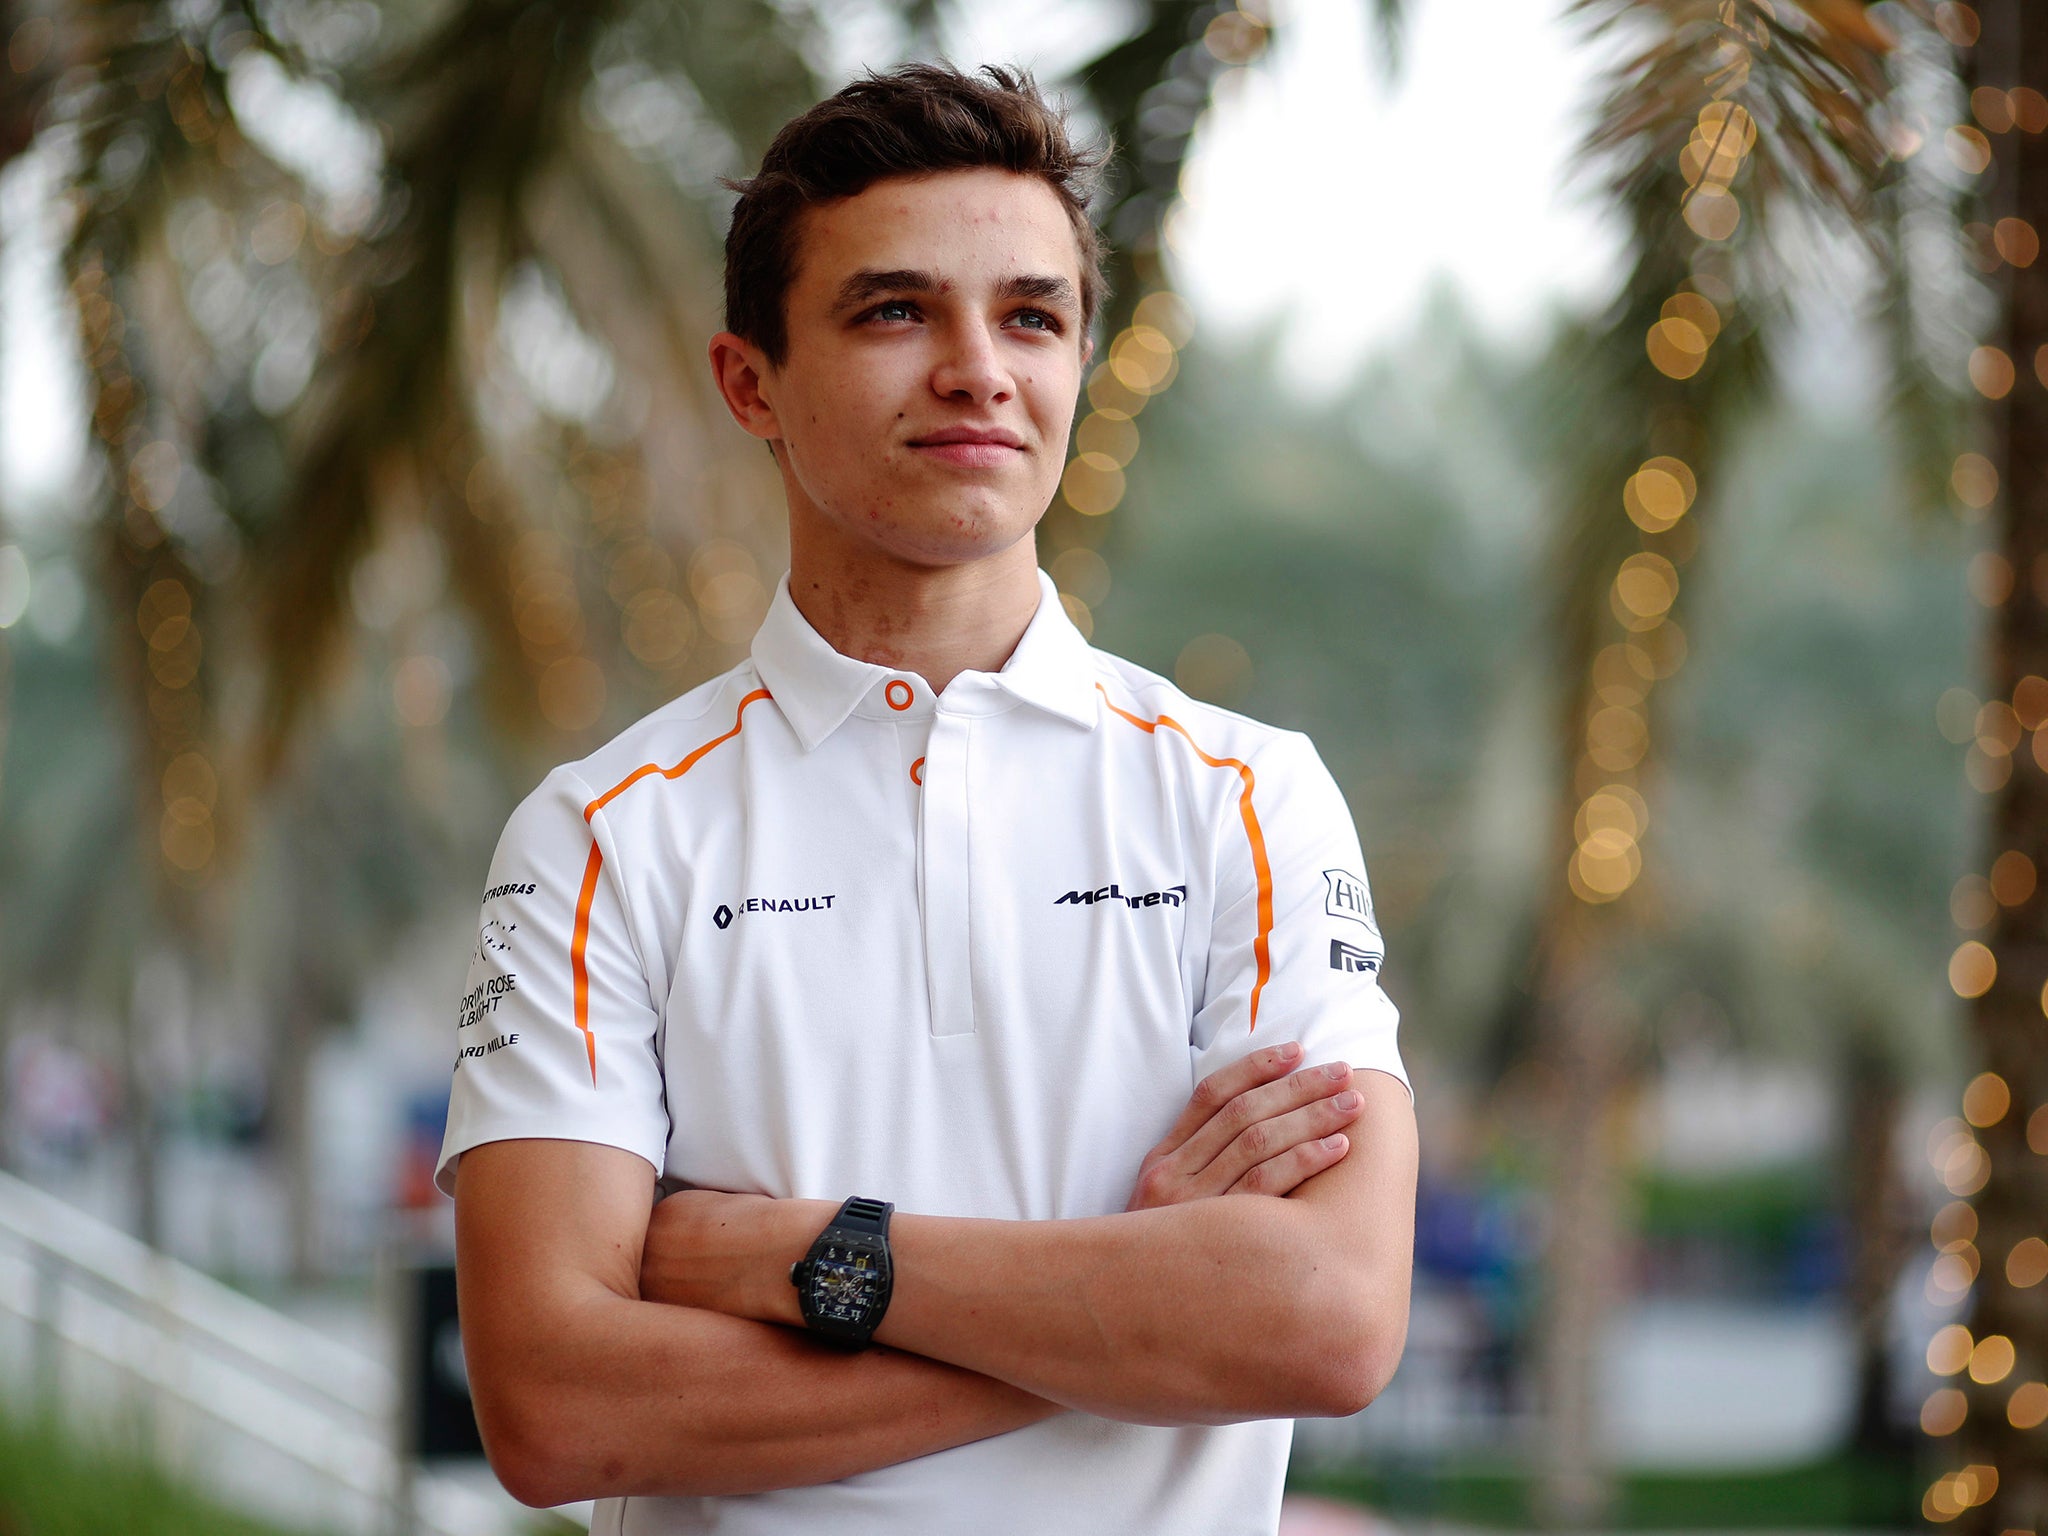 Toro Rosso are understood to have approached McLaren for reserve driver Lando Norris